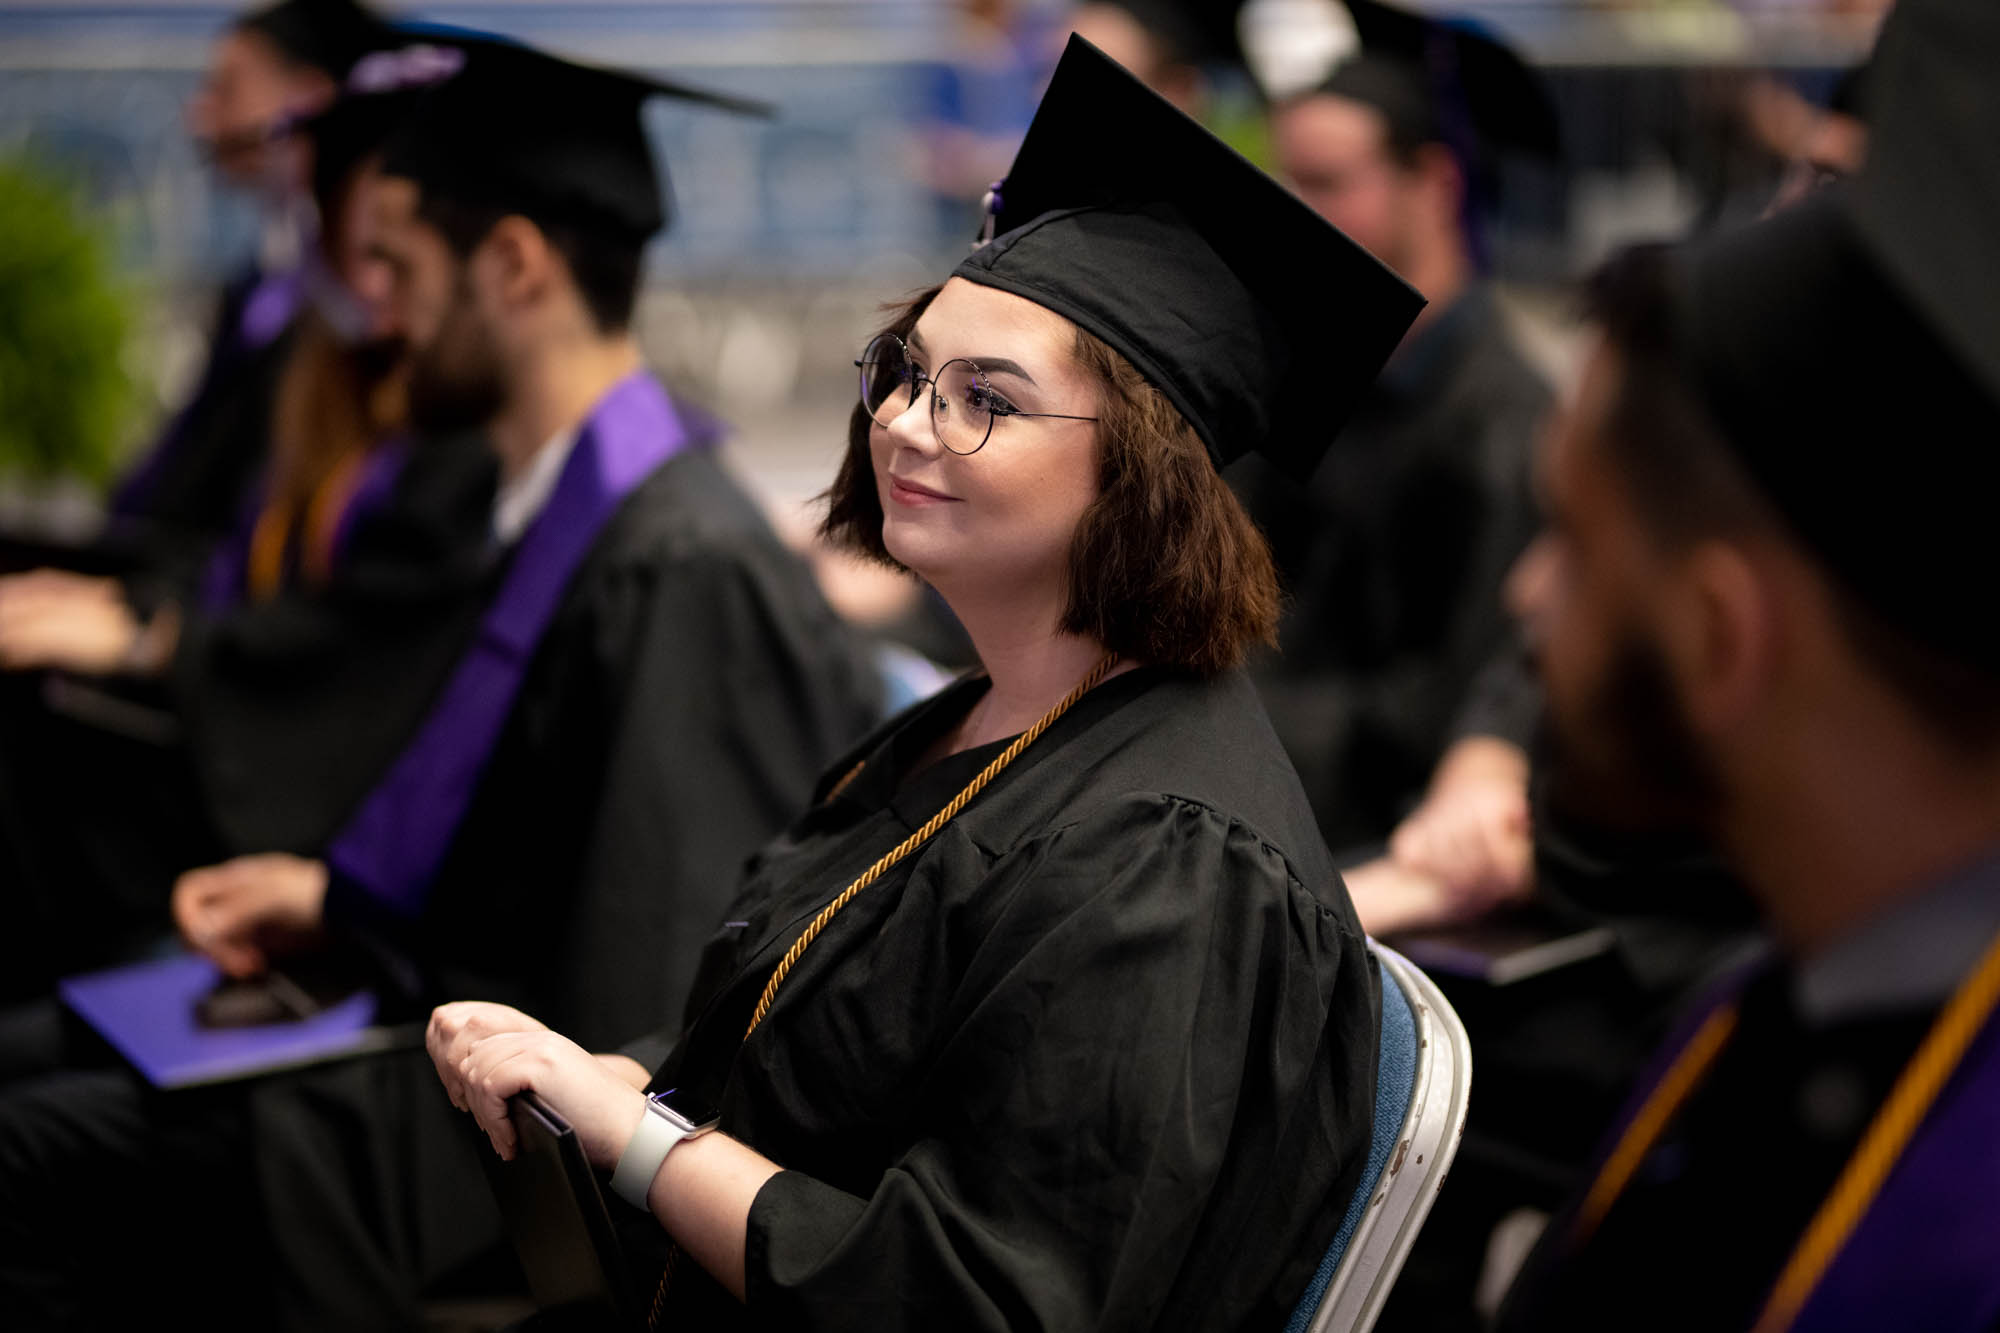 Nicole Ely attends the 2022 Florida Polytechnic University commencement ceremony.